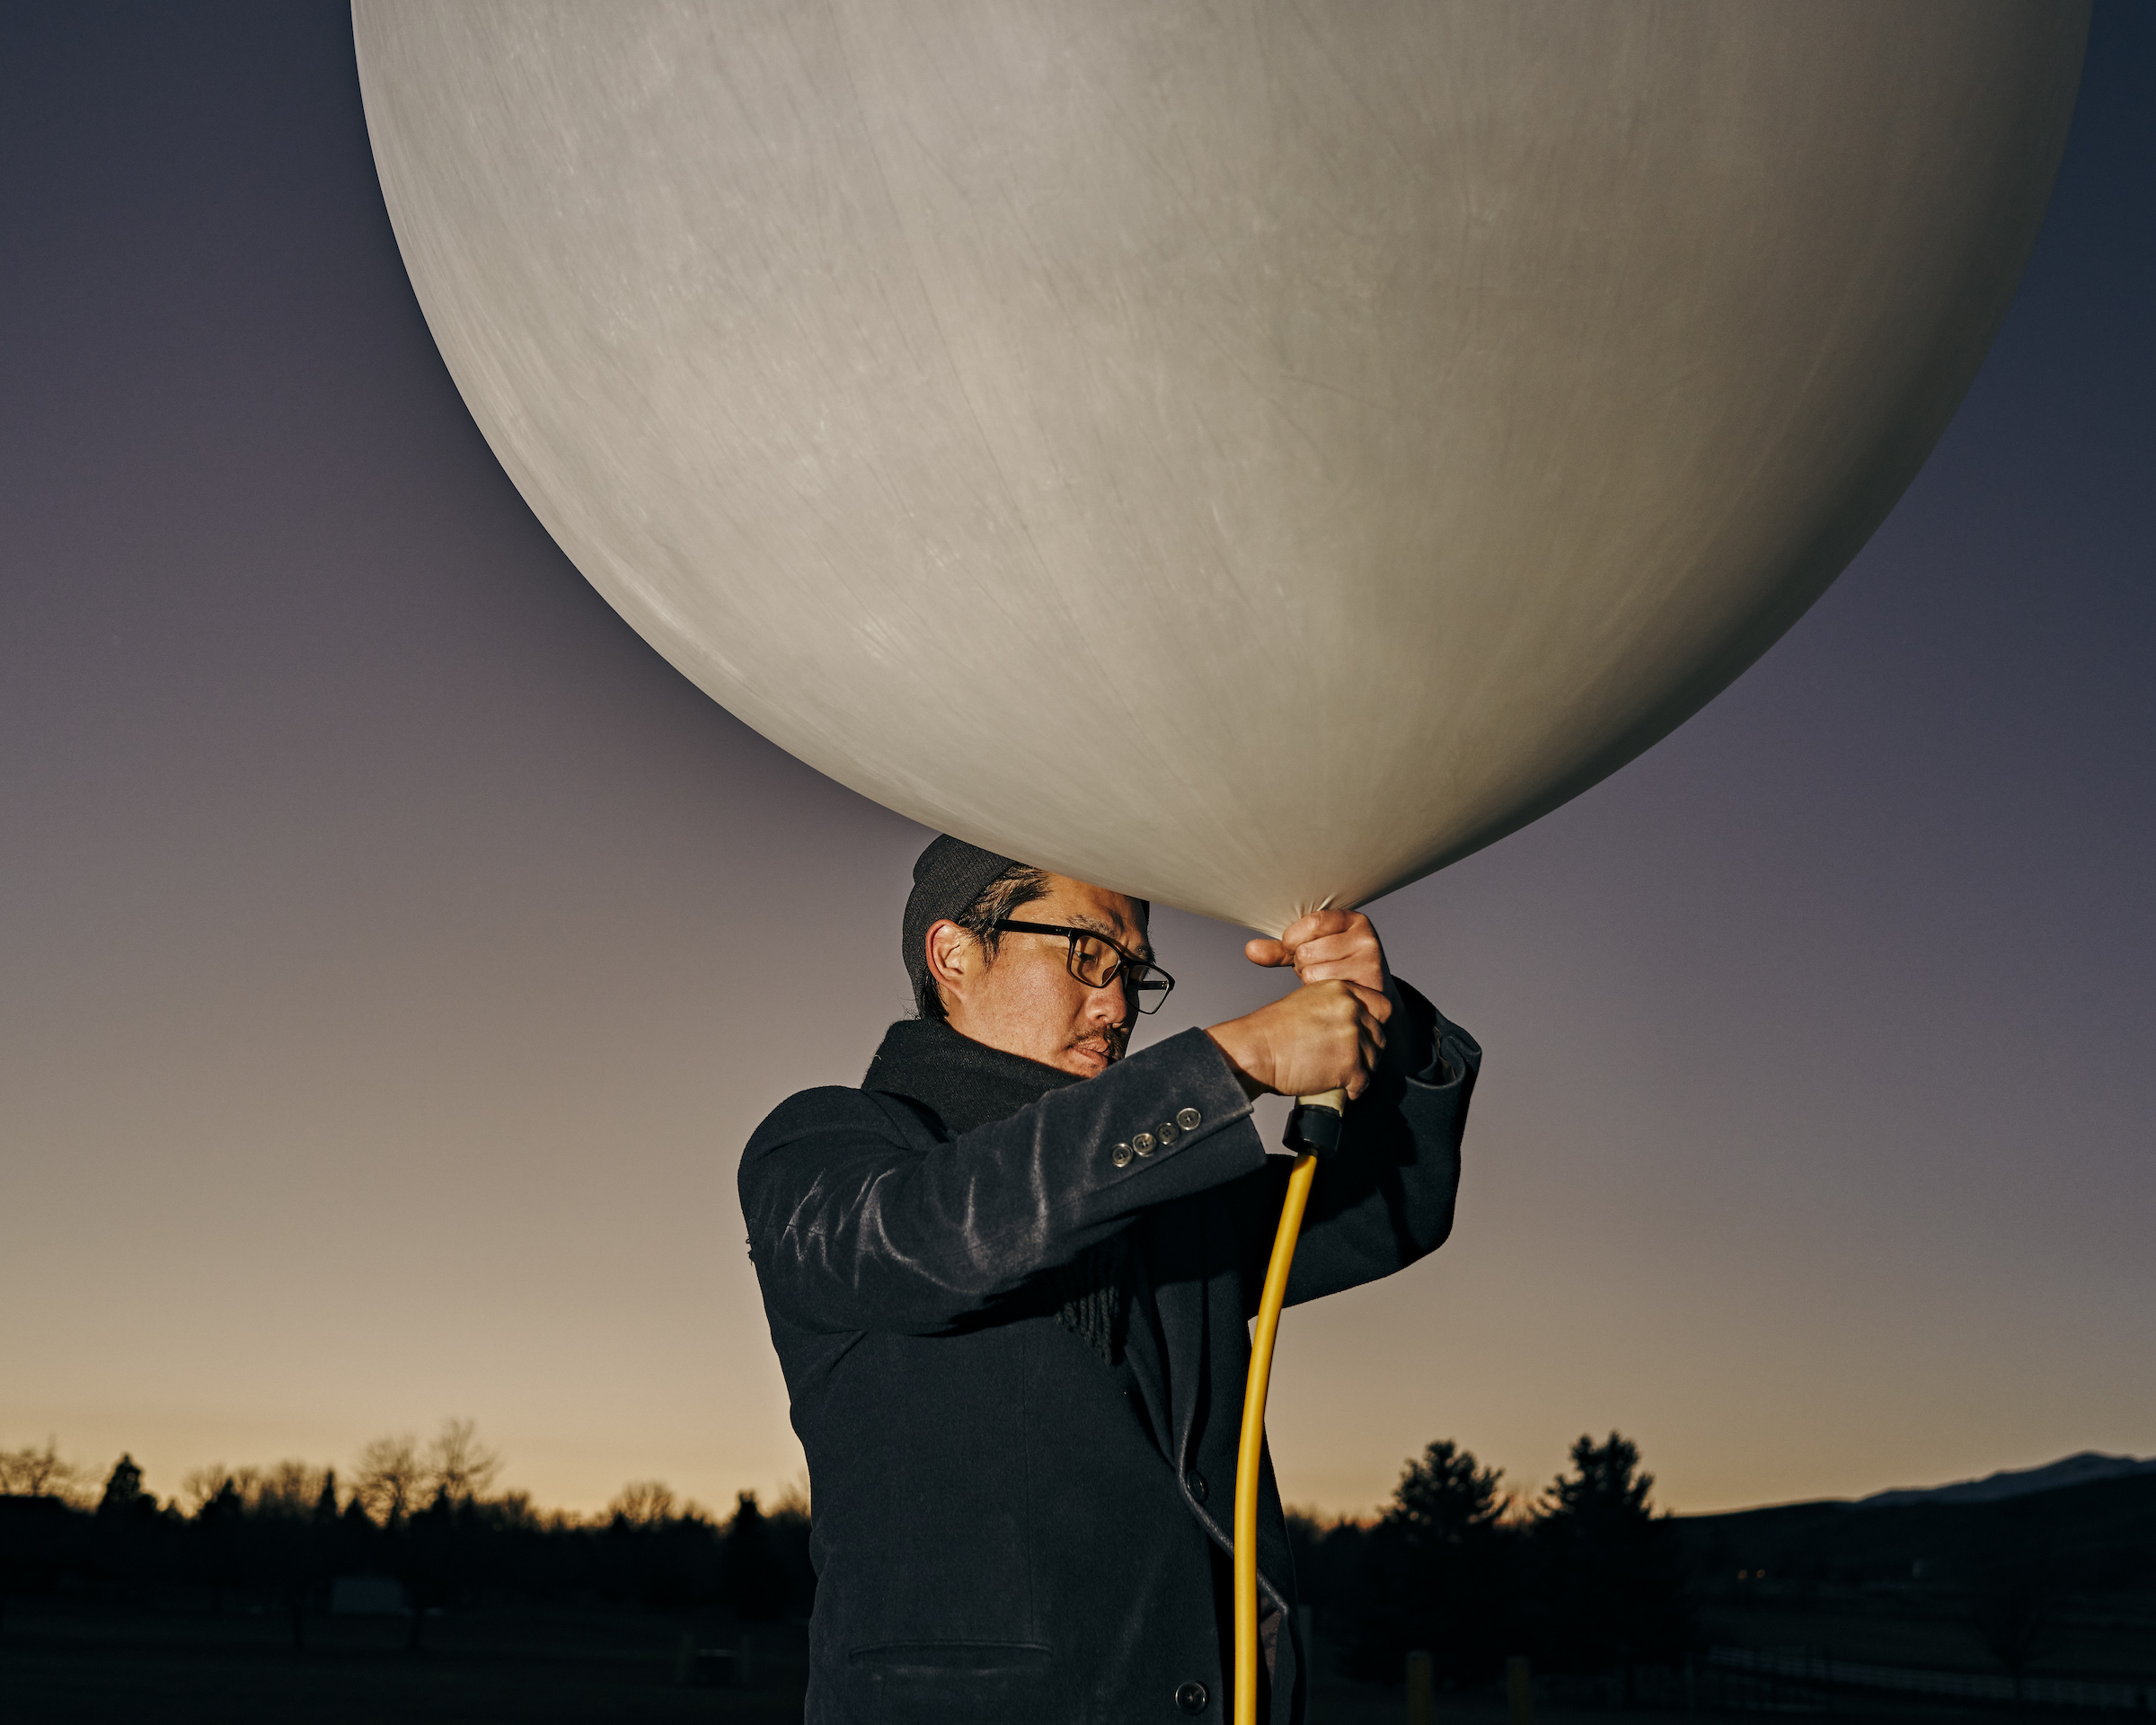 Co-founder Andrew Song of solar geoengineering startup Make Sunsets holds a weather balloon filled with helium, air and sulfur dioxide at a park in Reno, Nevada, United States on February 12, 2023. (Balazs Gardi for TIME)